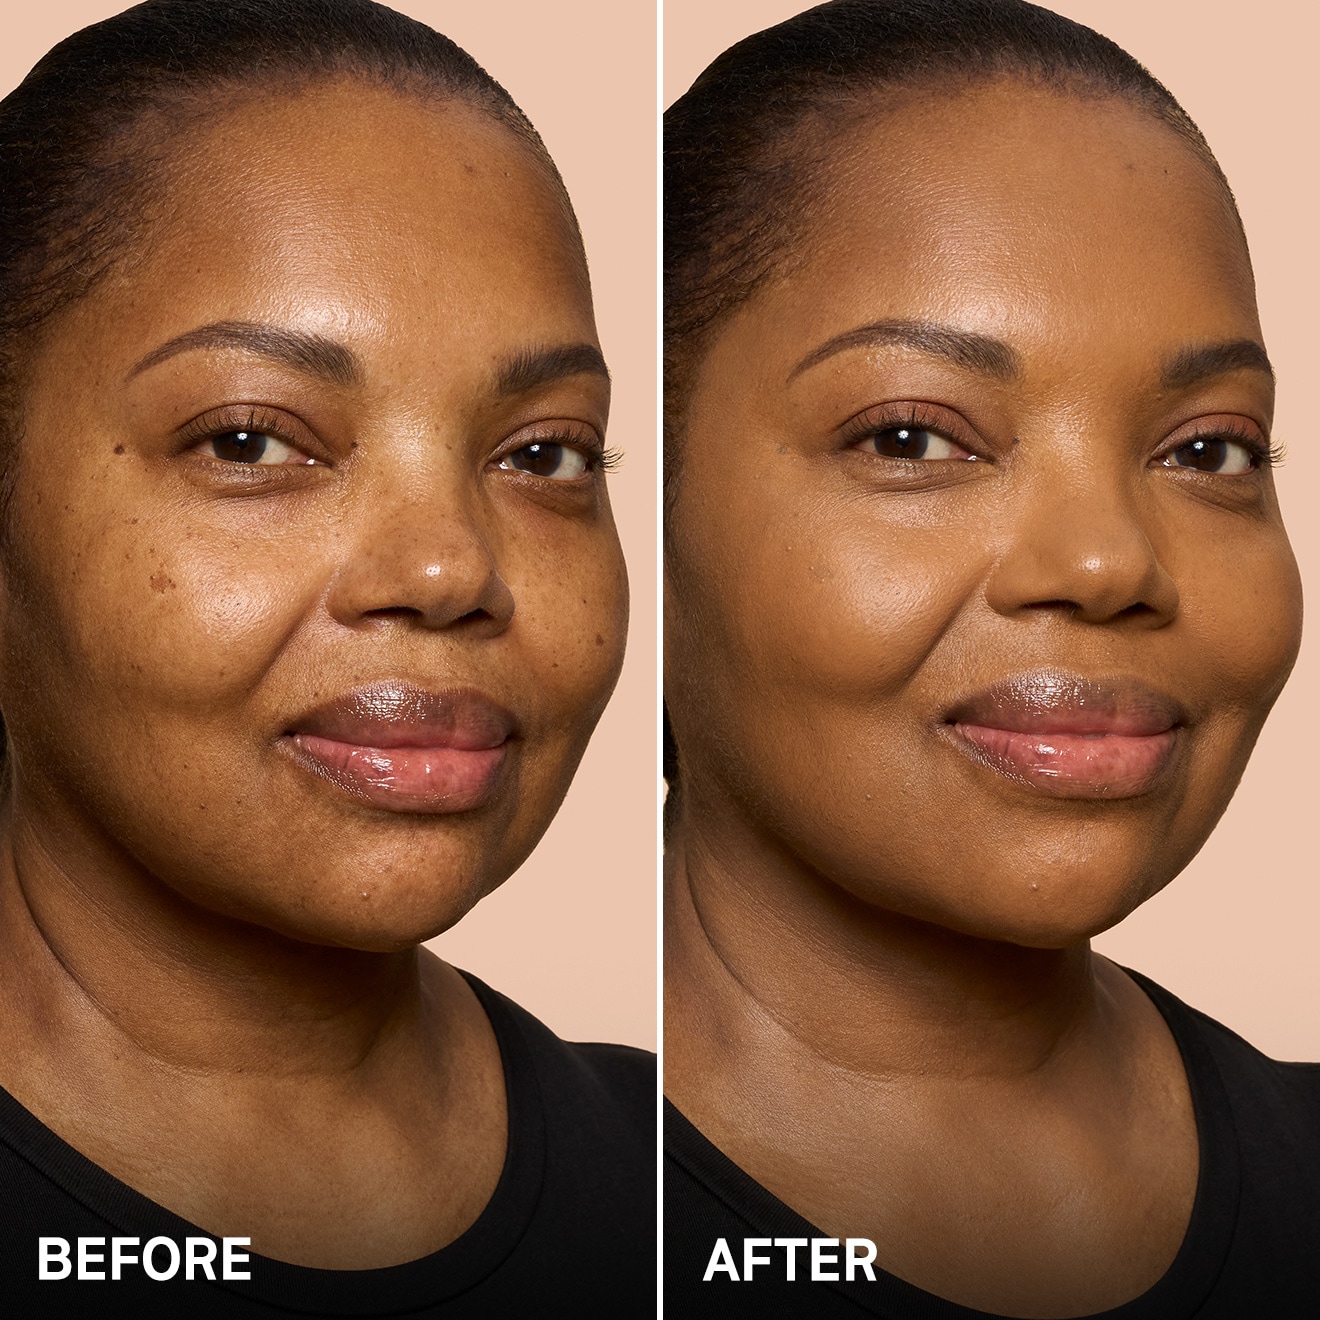 models before and after with foundation on